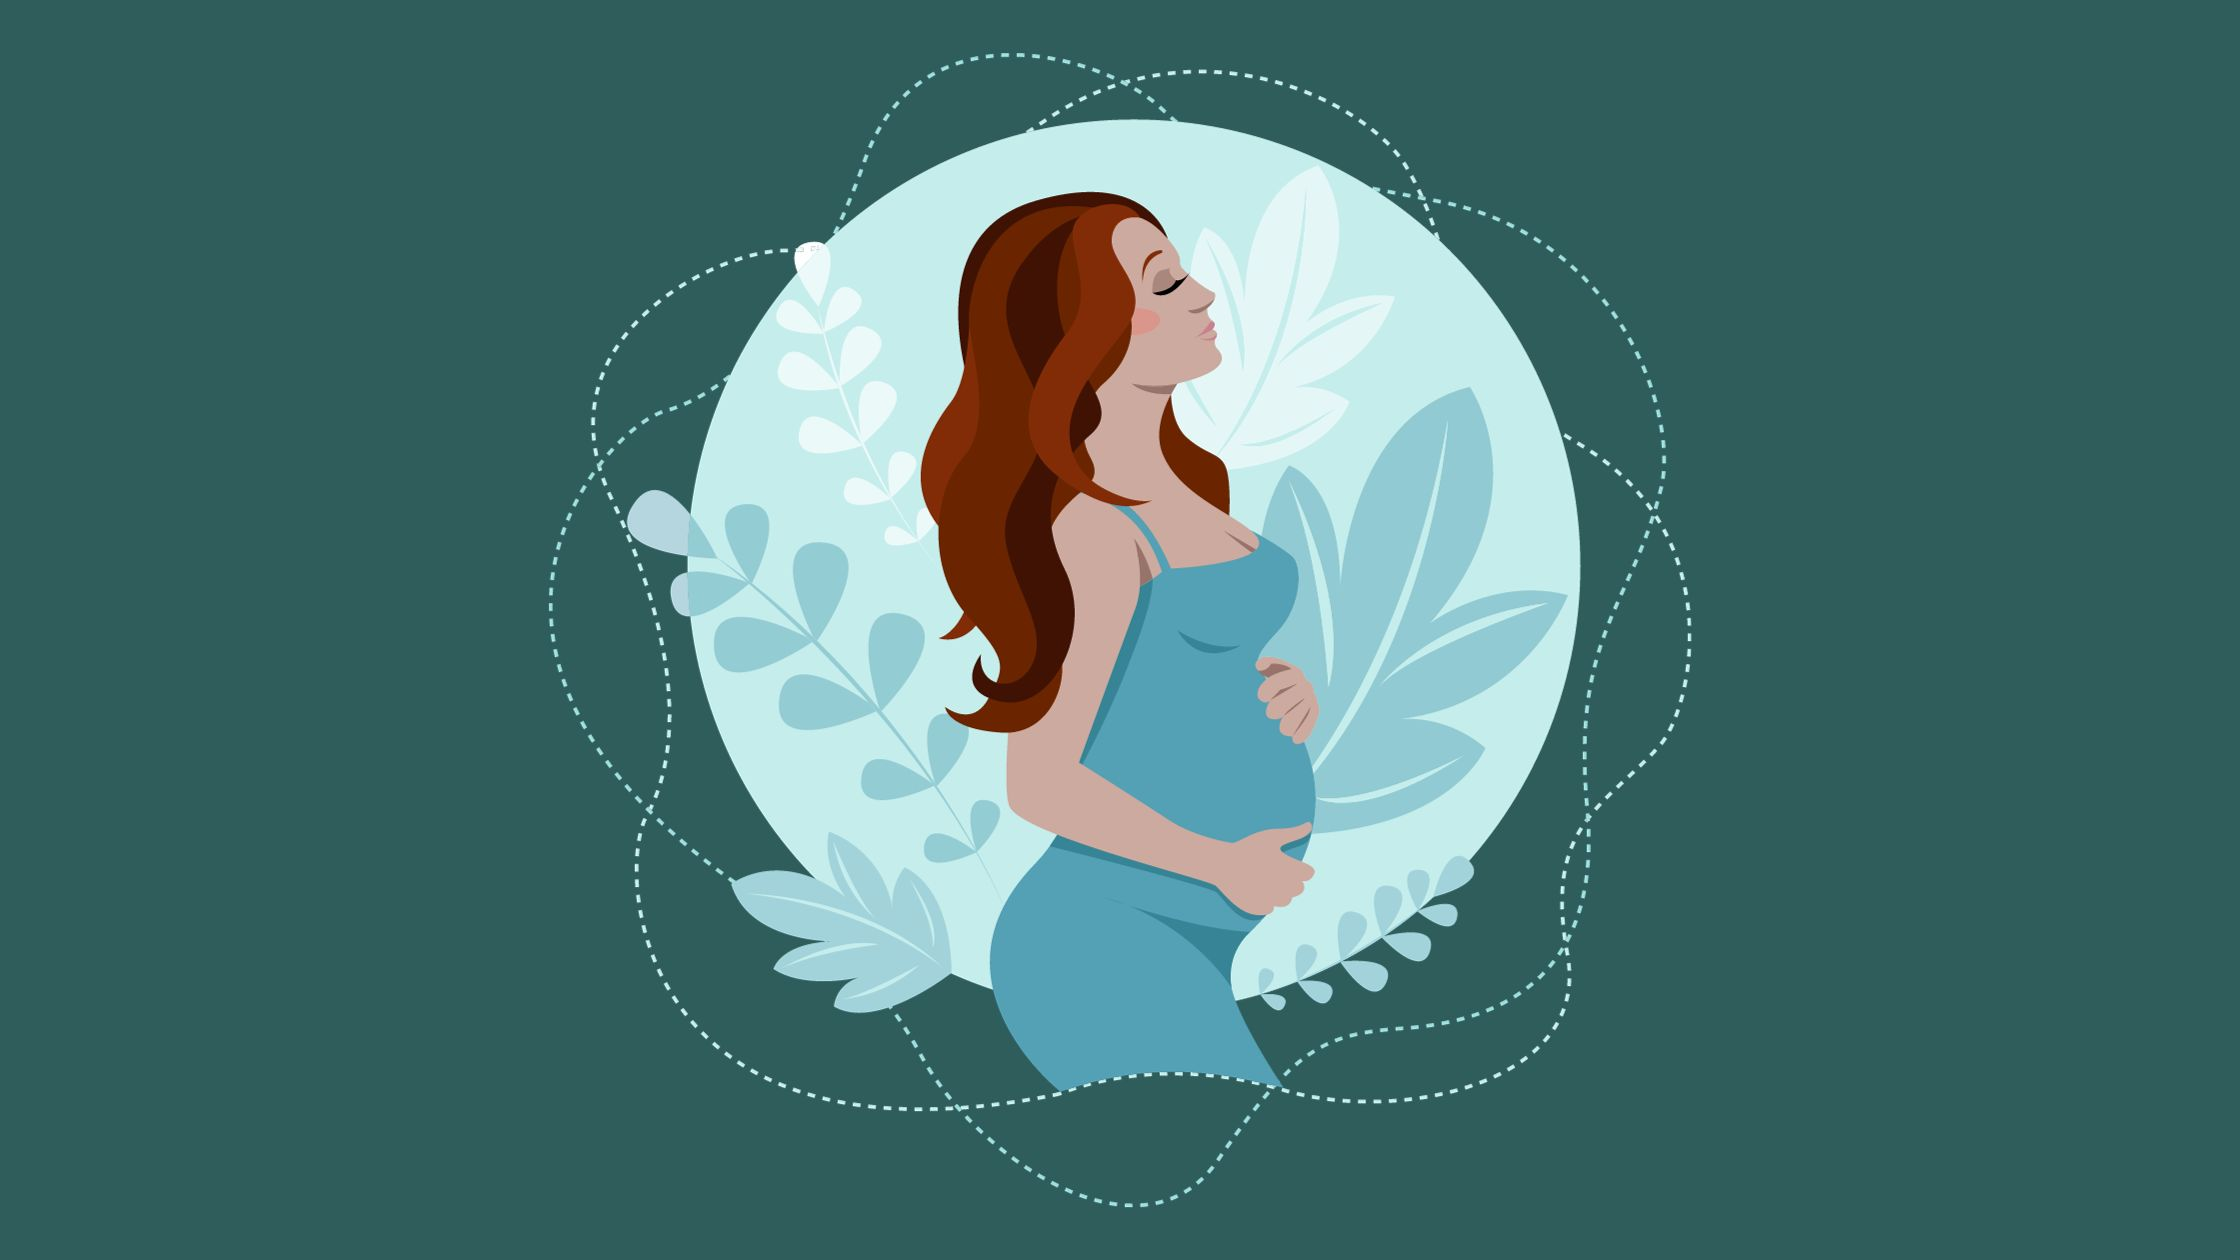 A woman experiencing early pregnancy symptoms such as fatigue, nausea, breast tenderness, and mood swings